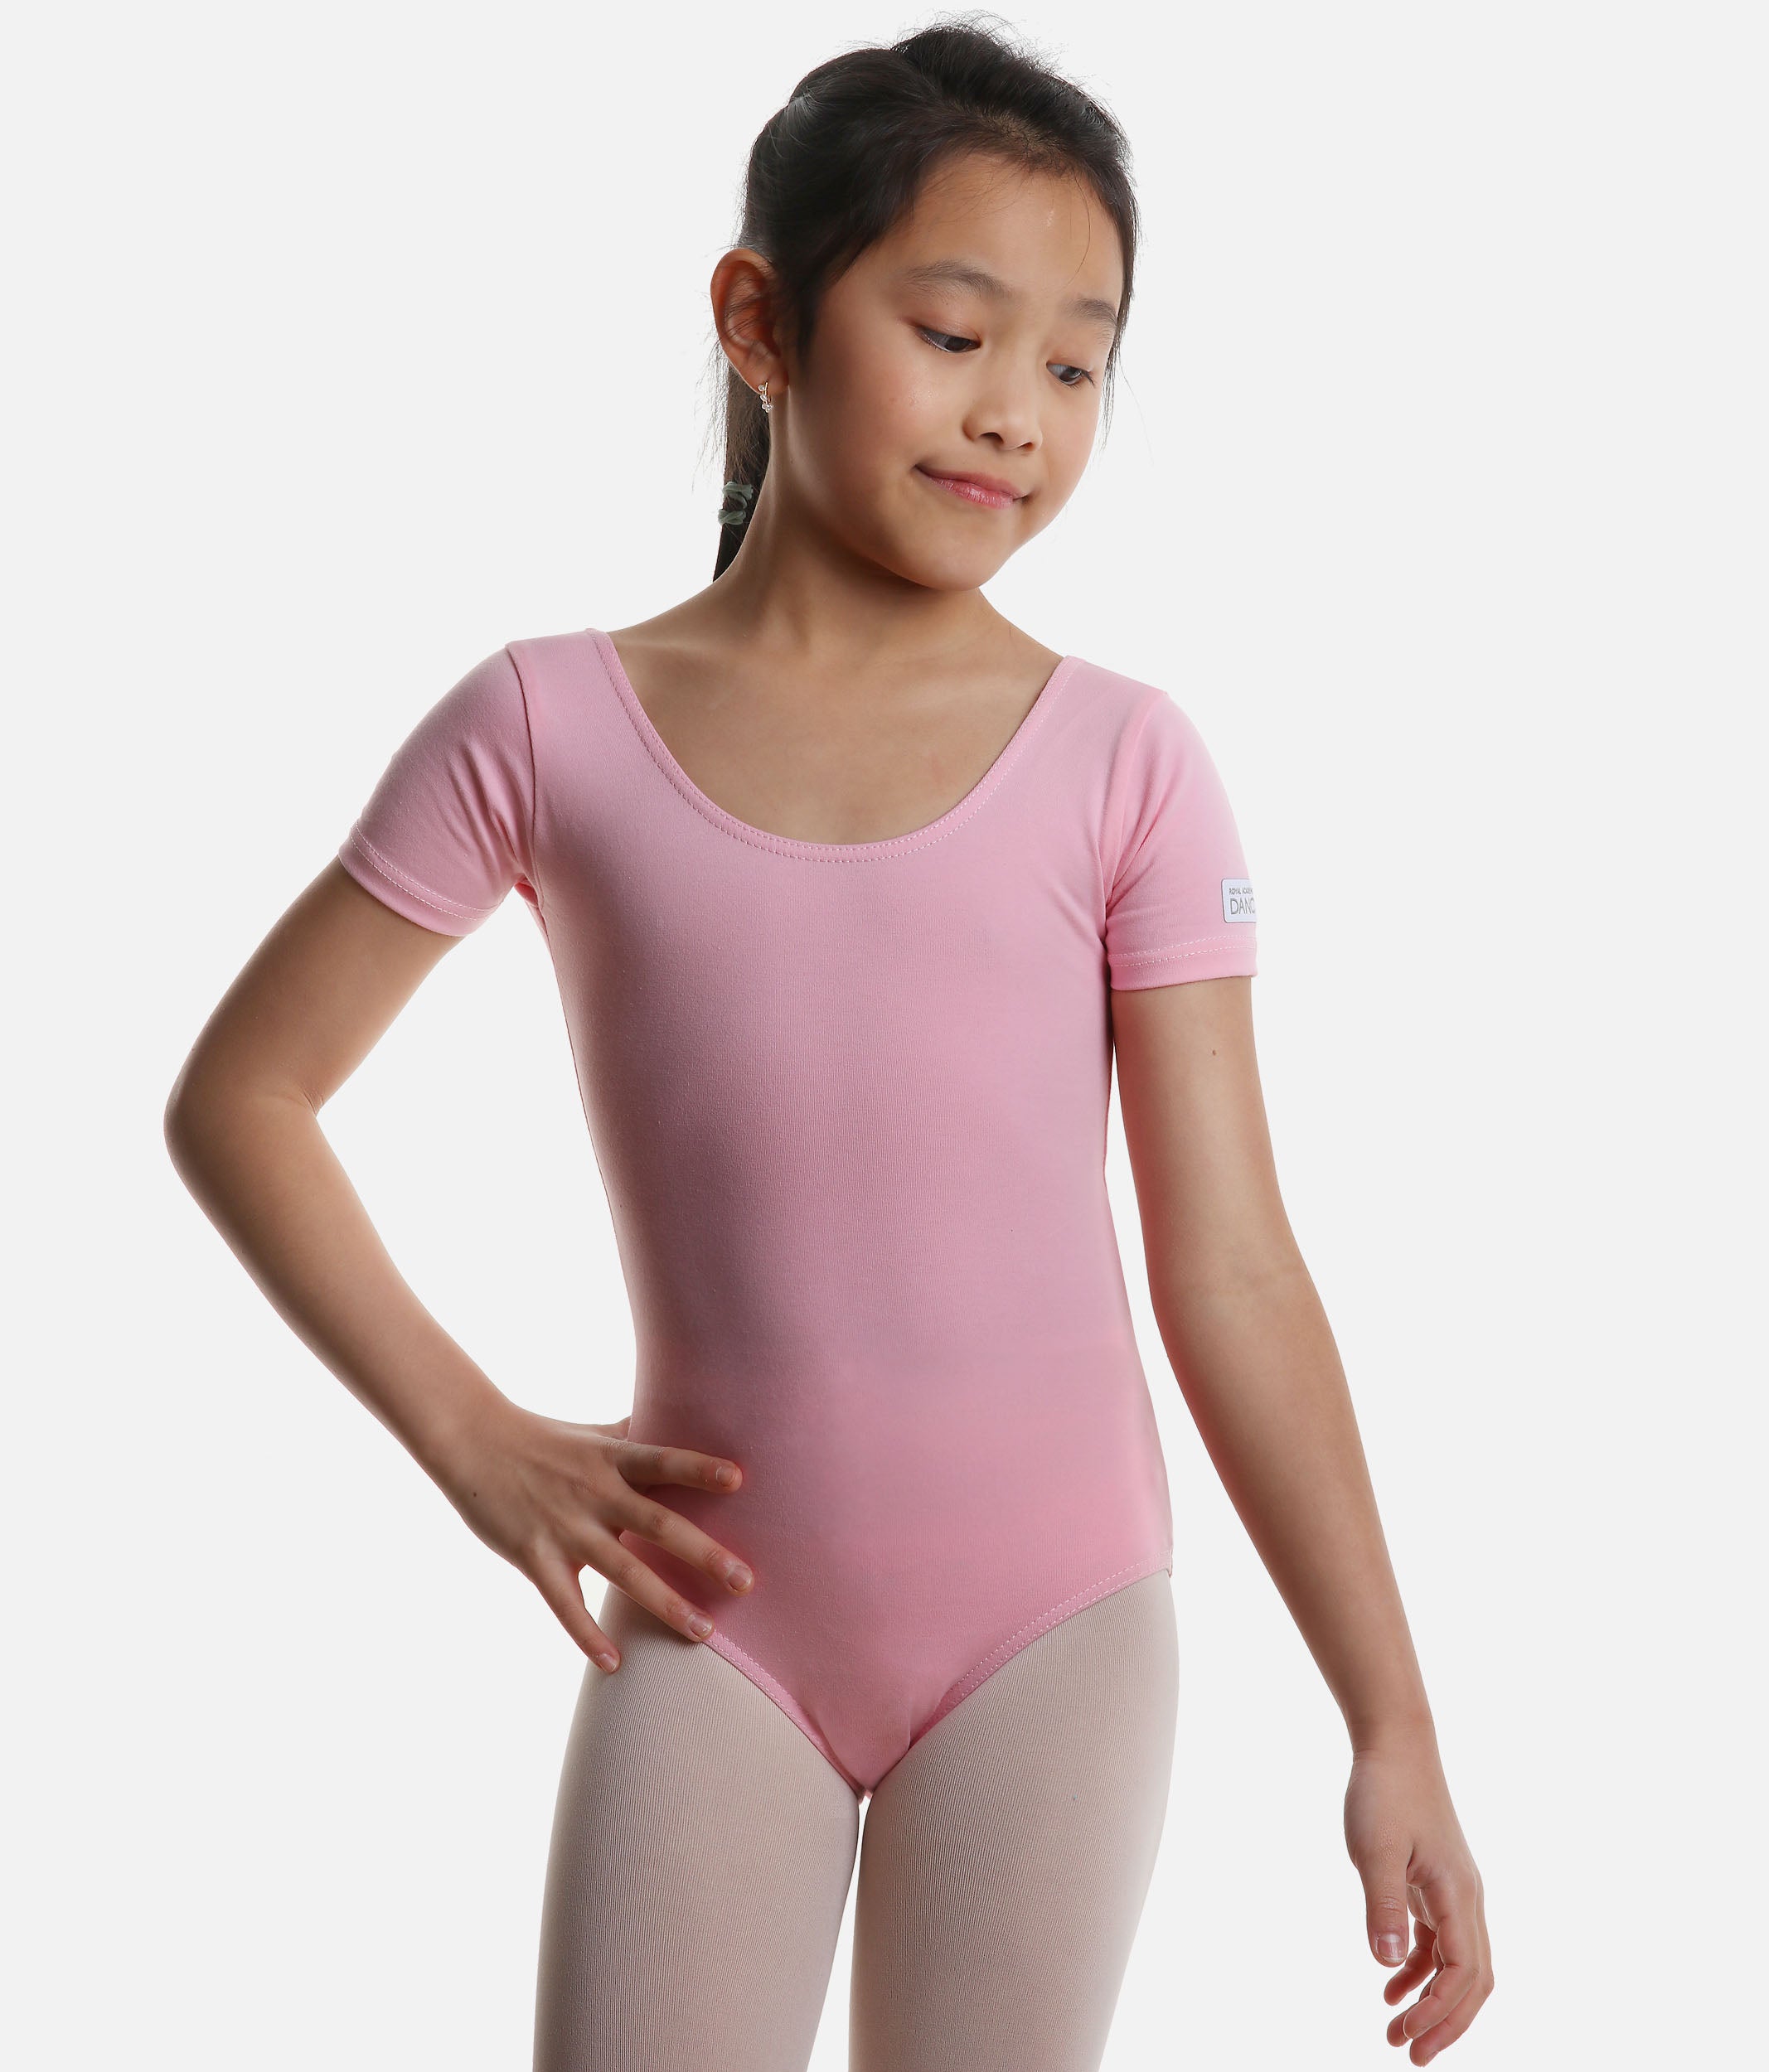 2 Sleeves leotard for dance and ballet